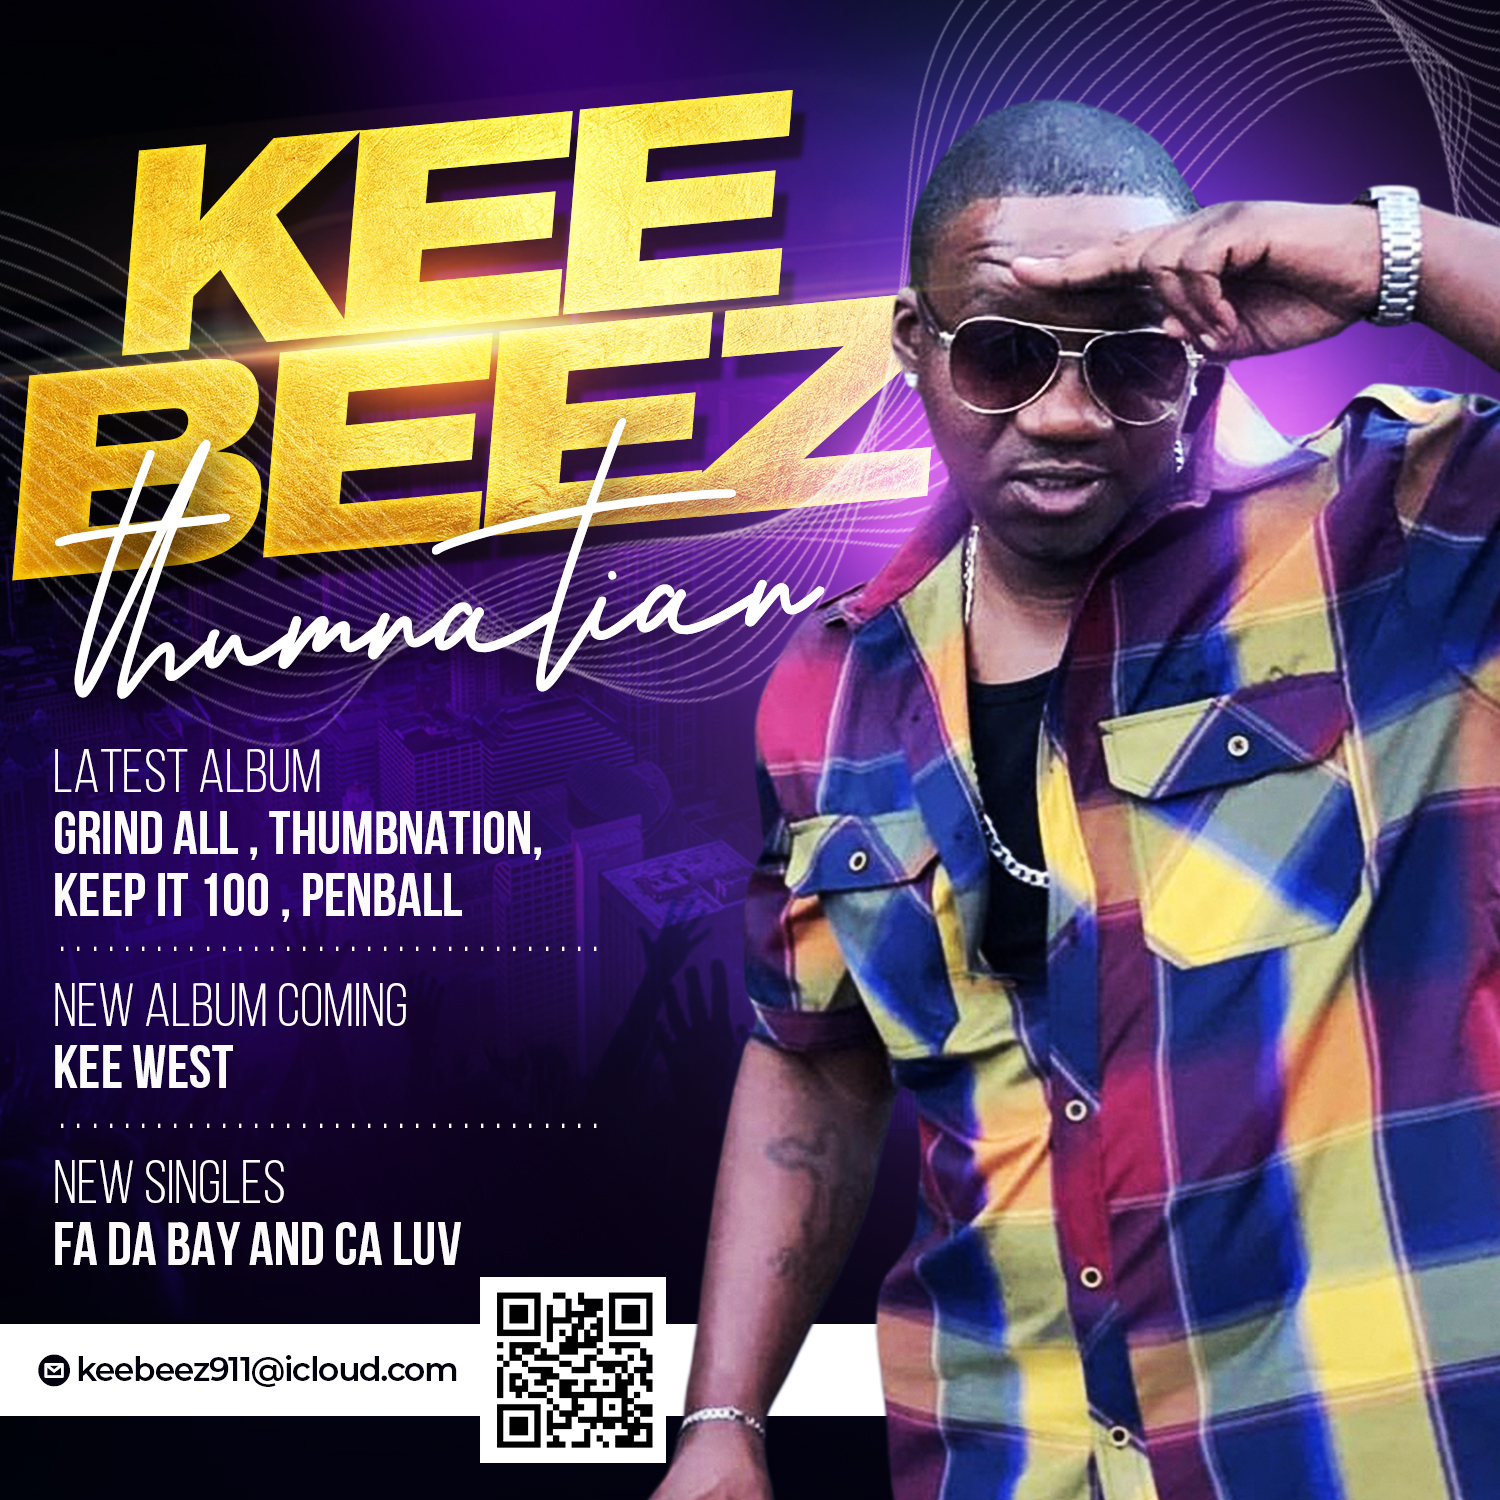 World-Renowned Rapper Kee Beez Unleashes ‘CA Luv’ on Daily Rotation – Don’t Miss Out